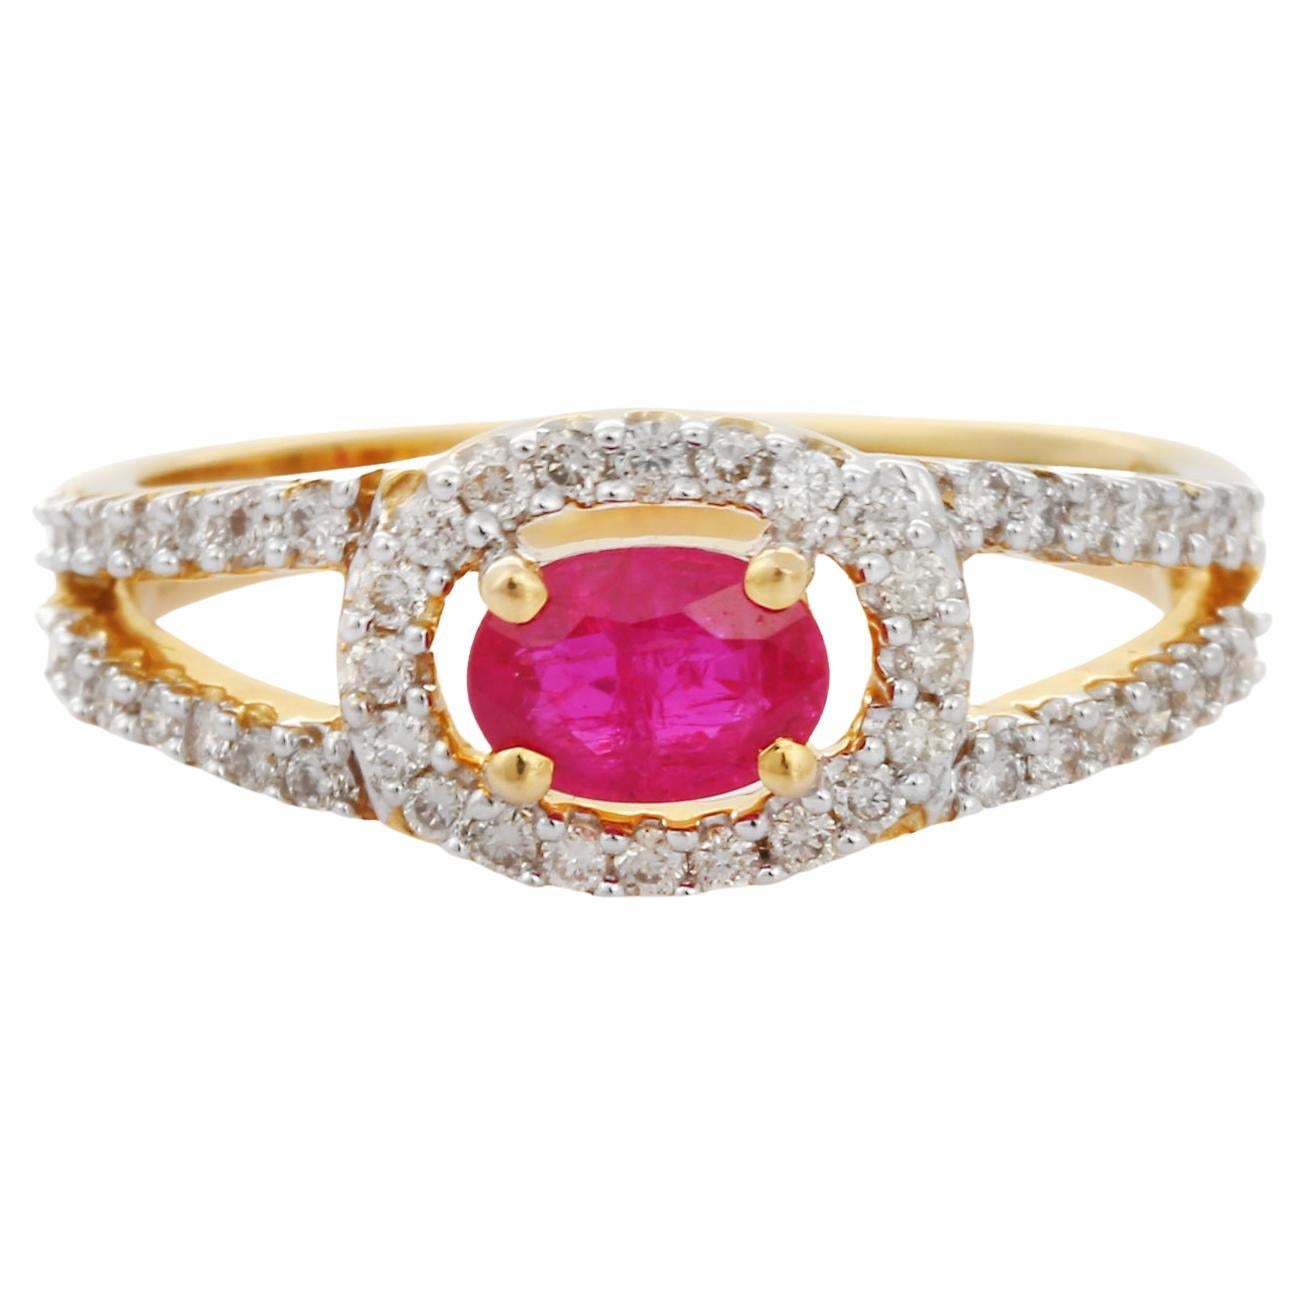 18K Yellow Gold Center Oval Cut Ruby Wedding Ring with Halo of Diamonds